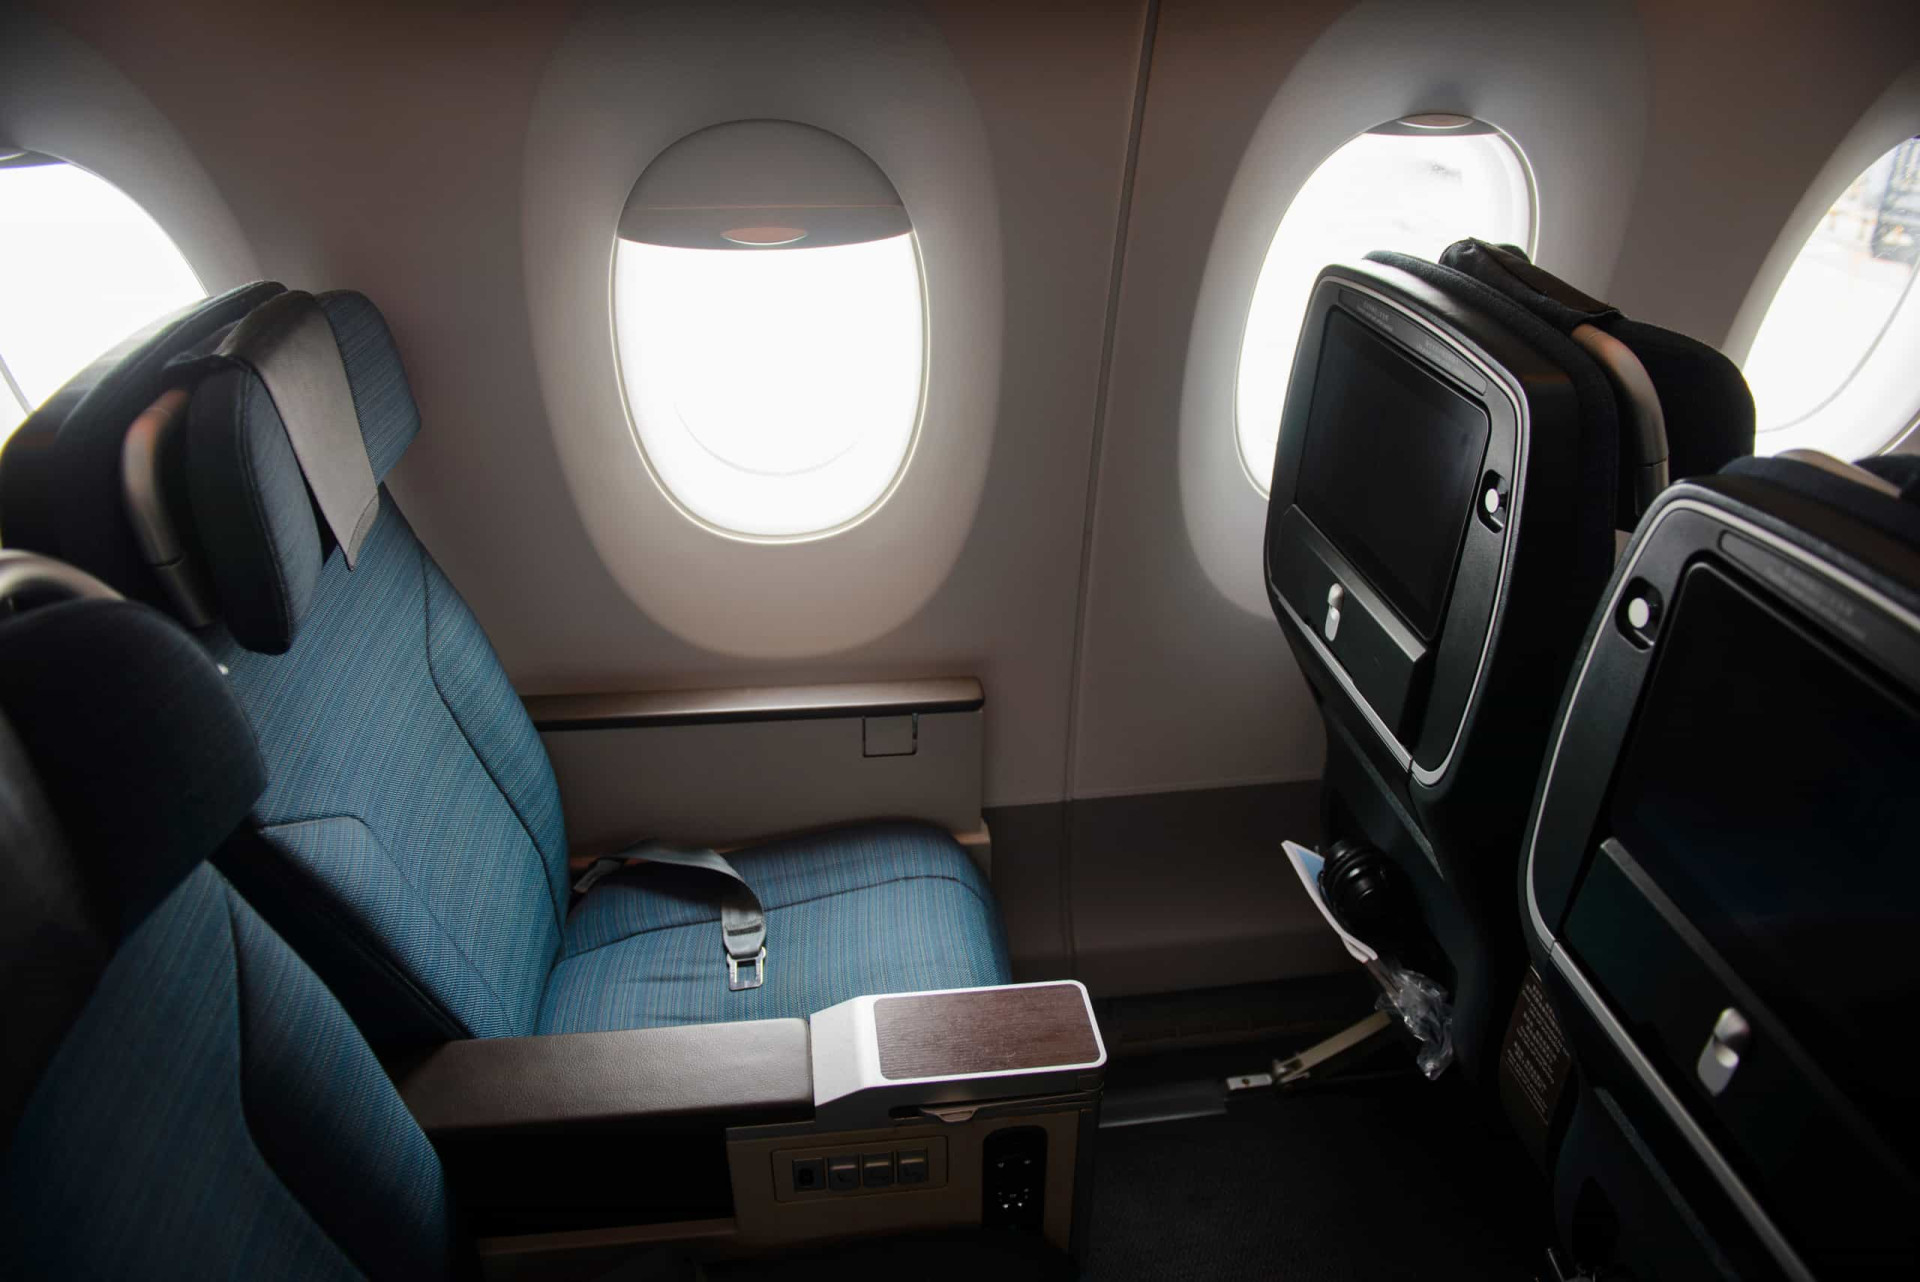 <p>Sadly, we don't always have the miles, but one step up is premium economy. It might be slightly more expensive, but the benefits of priority check-in, extra legroom, and comfortable seats makes it worth it.</p><p><a href="https://www.msn.com/en-us/community/channel/vid-7xx8mnucu55yw63we9va2gwr7uihbxwc68fxqp25x6tg4ftibpra?cvid=94631541bc0f4f89bfd59158d696ad7e">Follow us and access great exclusive content every day</a></p>